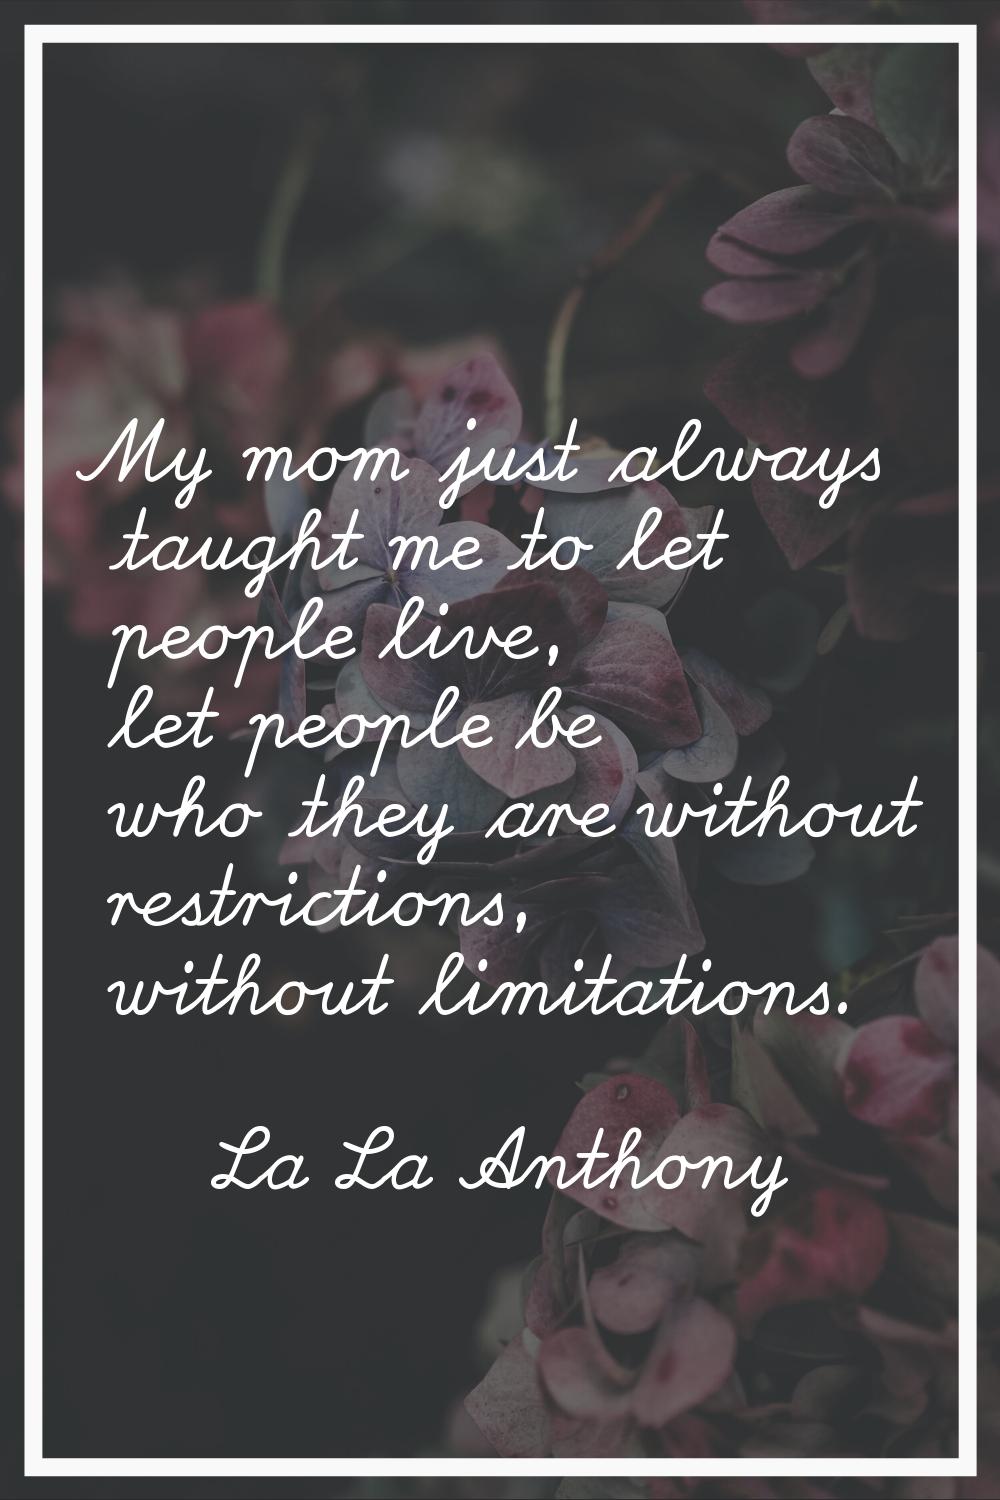 My mom just always taught me to let people live, let people be who they are without restrictions, w